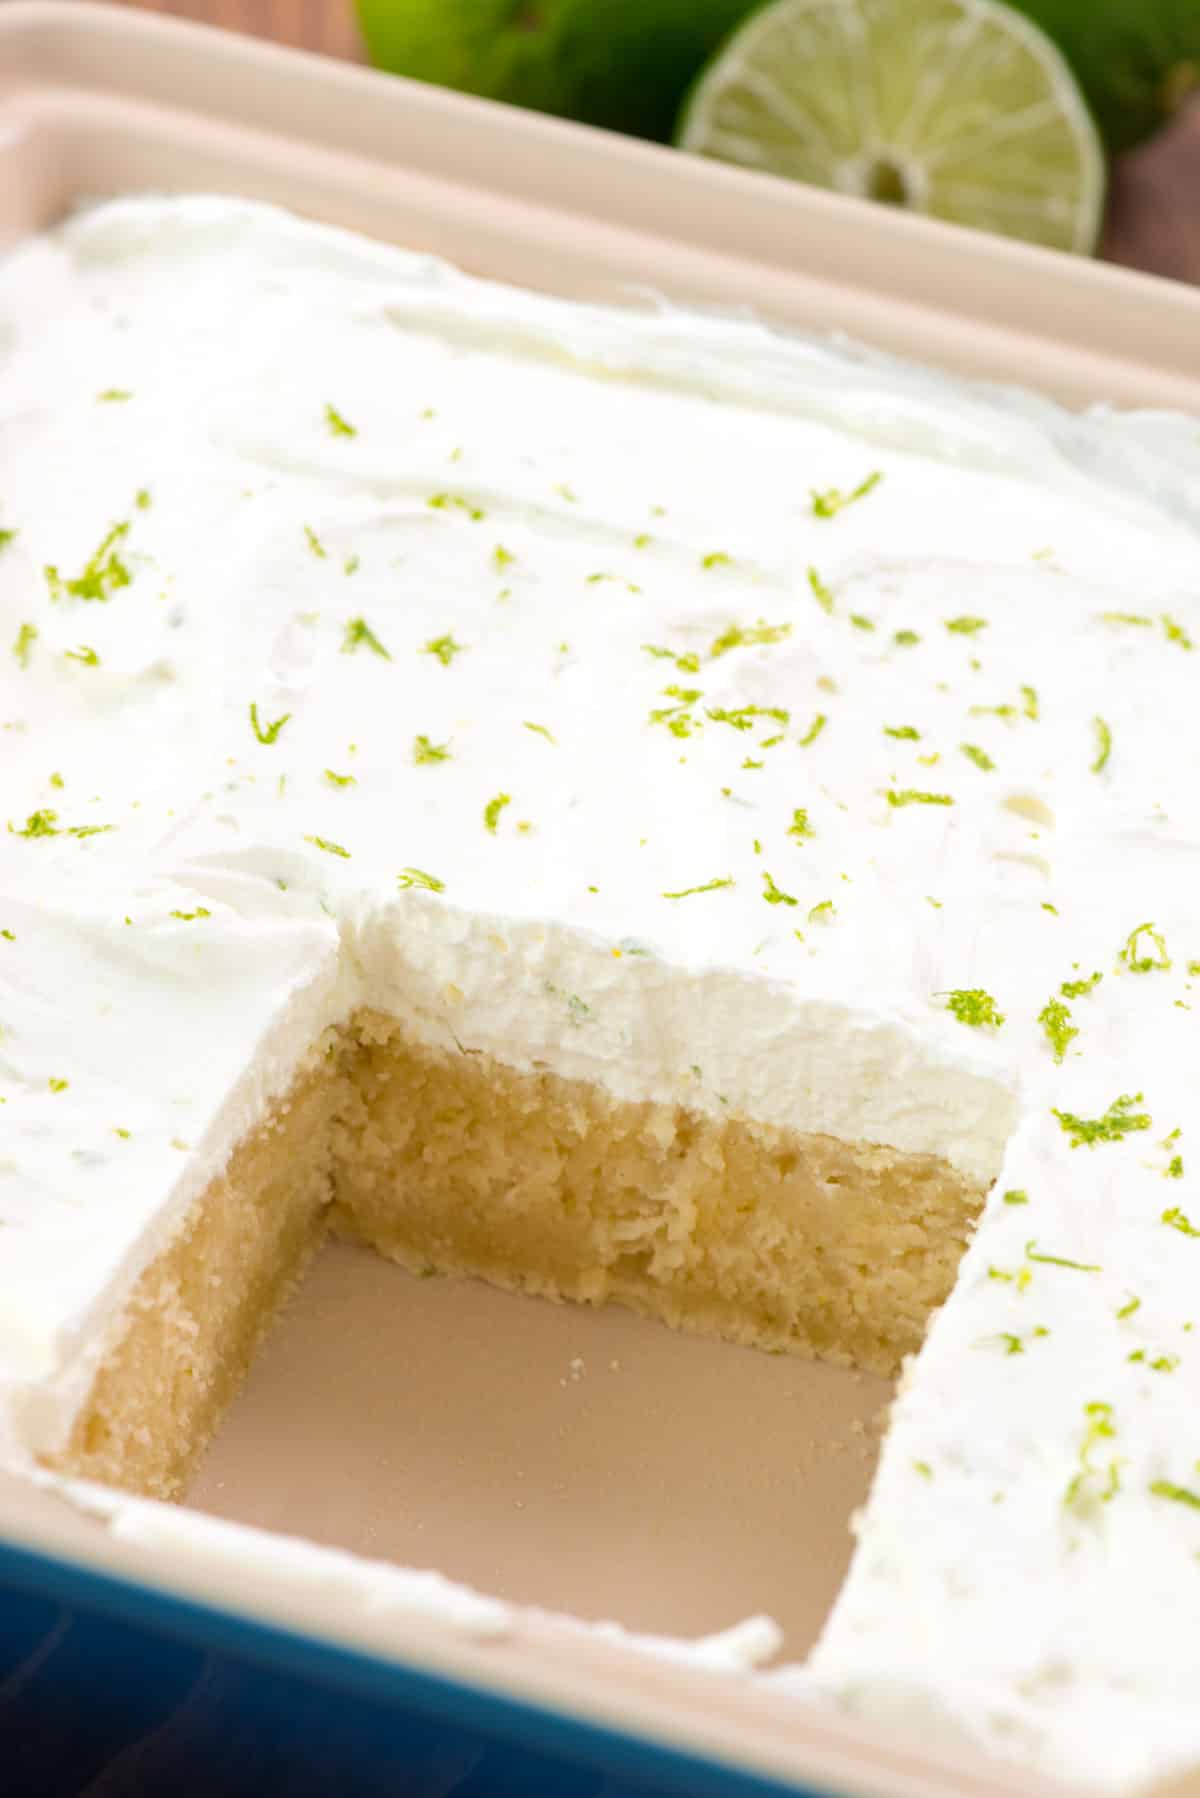 one slice of key lime cake with a sliced lime on top.